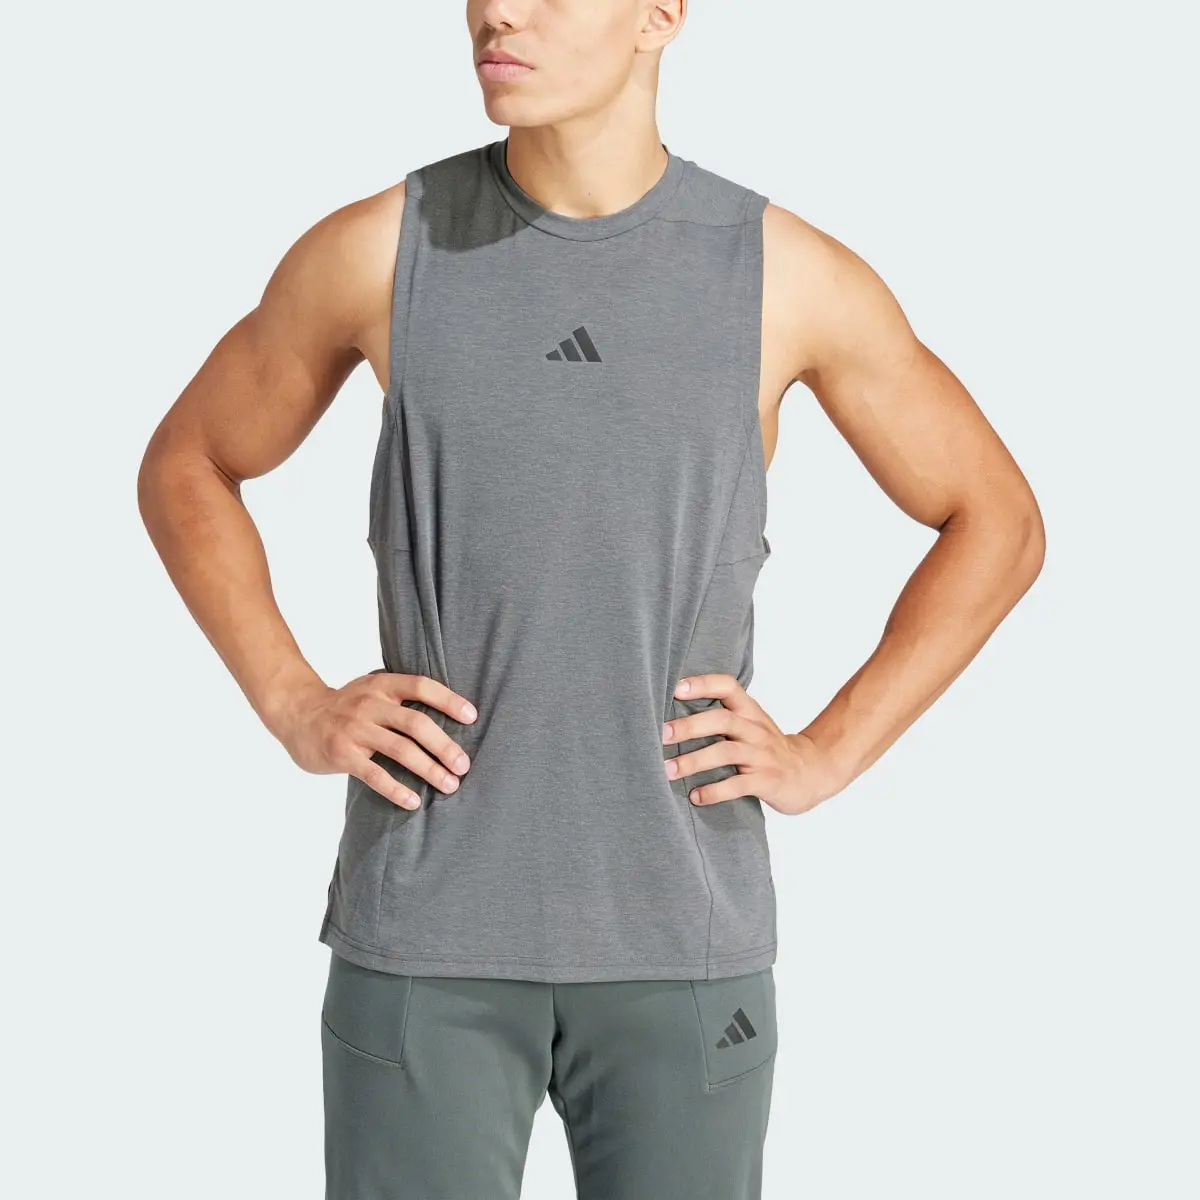 Adidas Designed for Training Workout Tanktop. 1